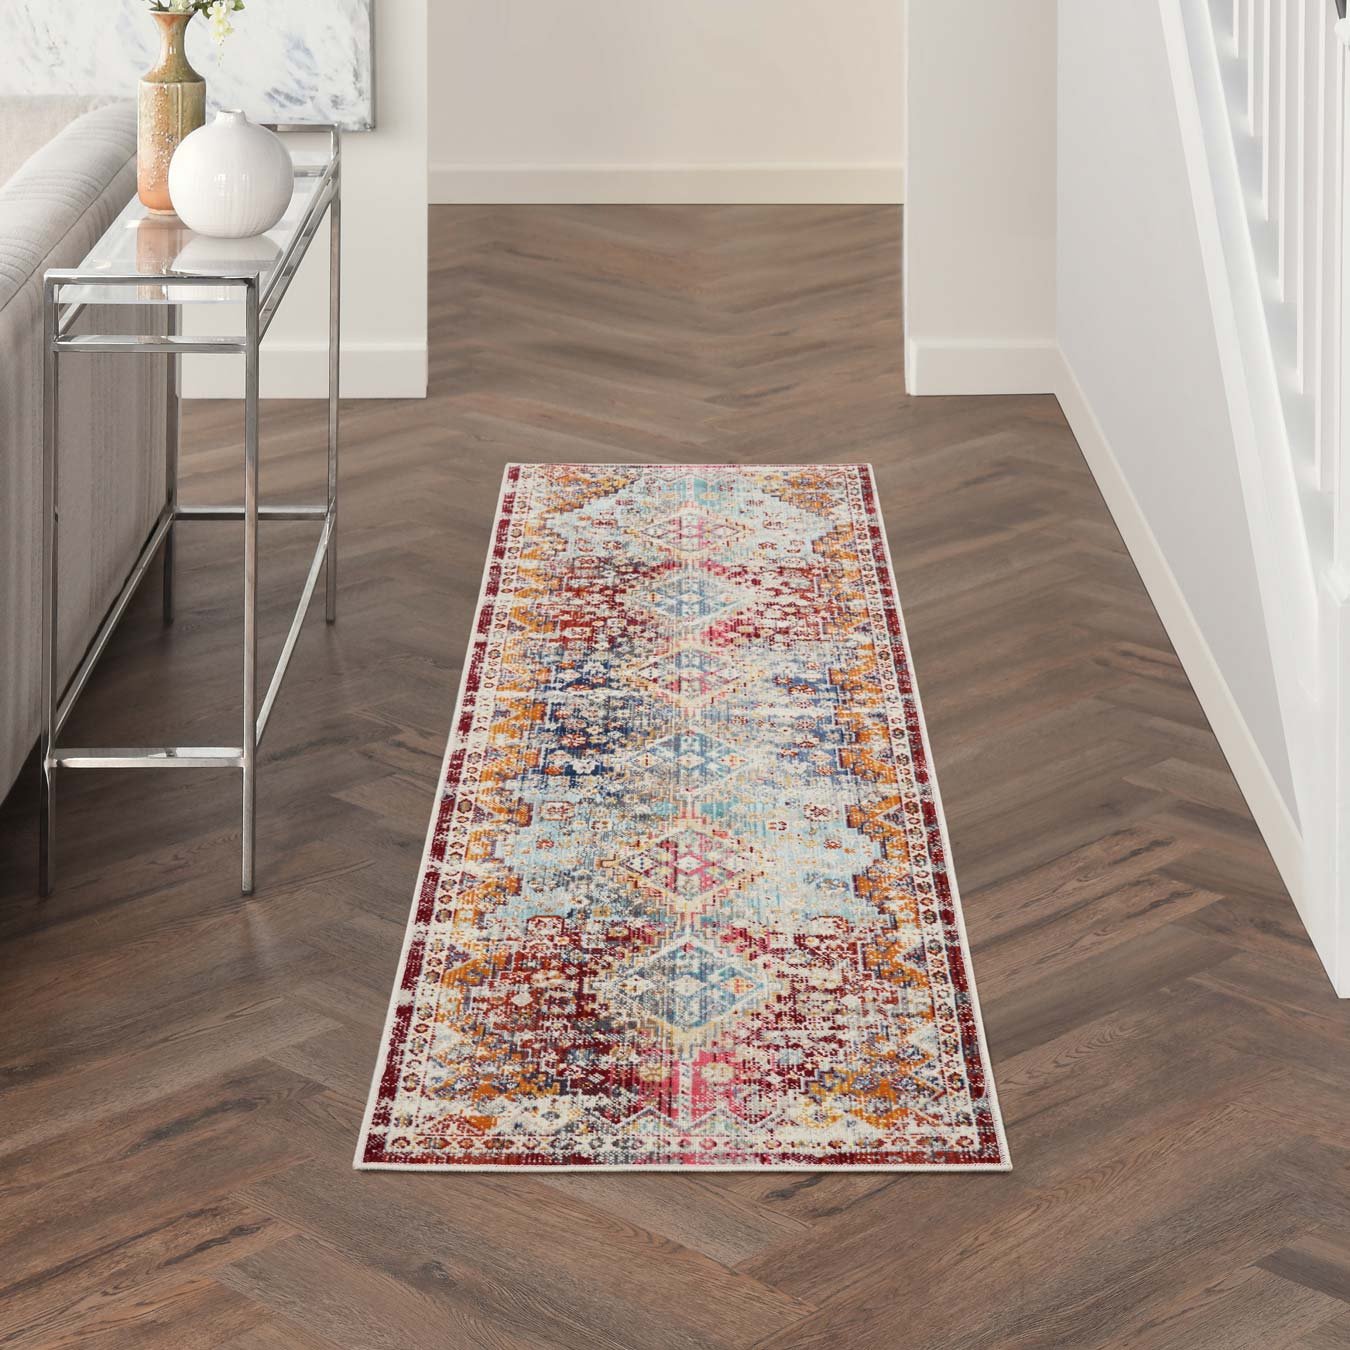 How to Keep a Carpet Runner From Moving on Carpet | PlushRugs